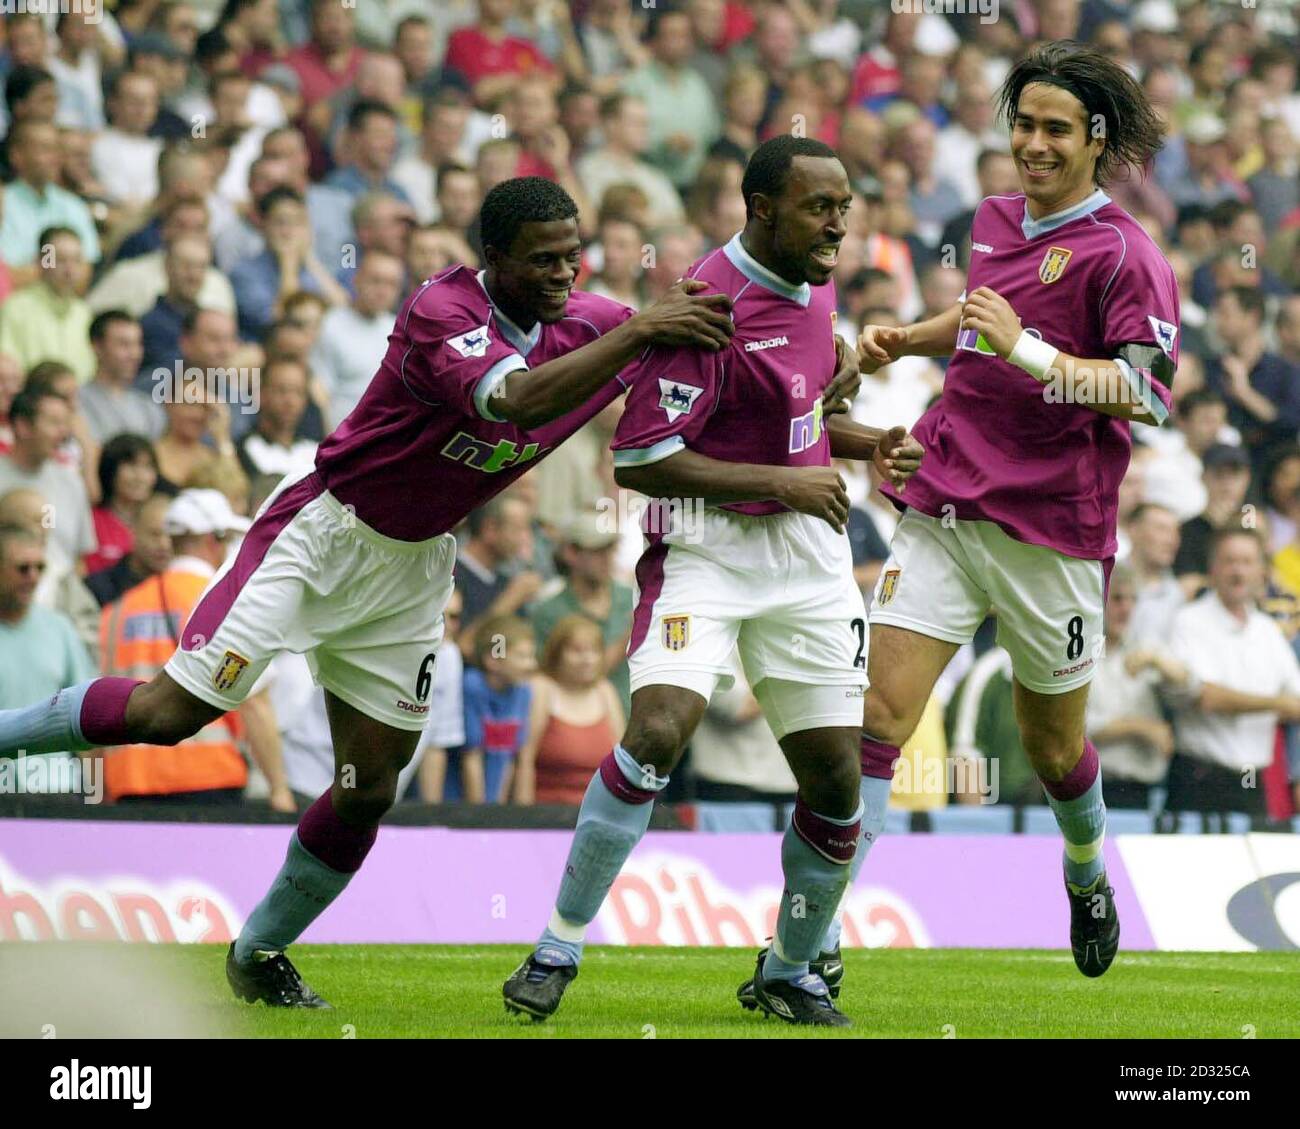 Aston Villa's Darius Vassell celebrates with team-mates George Boateng & Juan Pablo Angel (right) after scoring the first goal against Manchester United during the FA Barclaycard Premiership game at Villa Park, Birmingham. Stock Photo